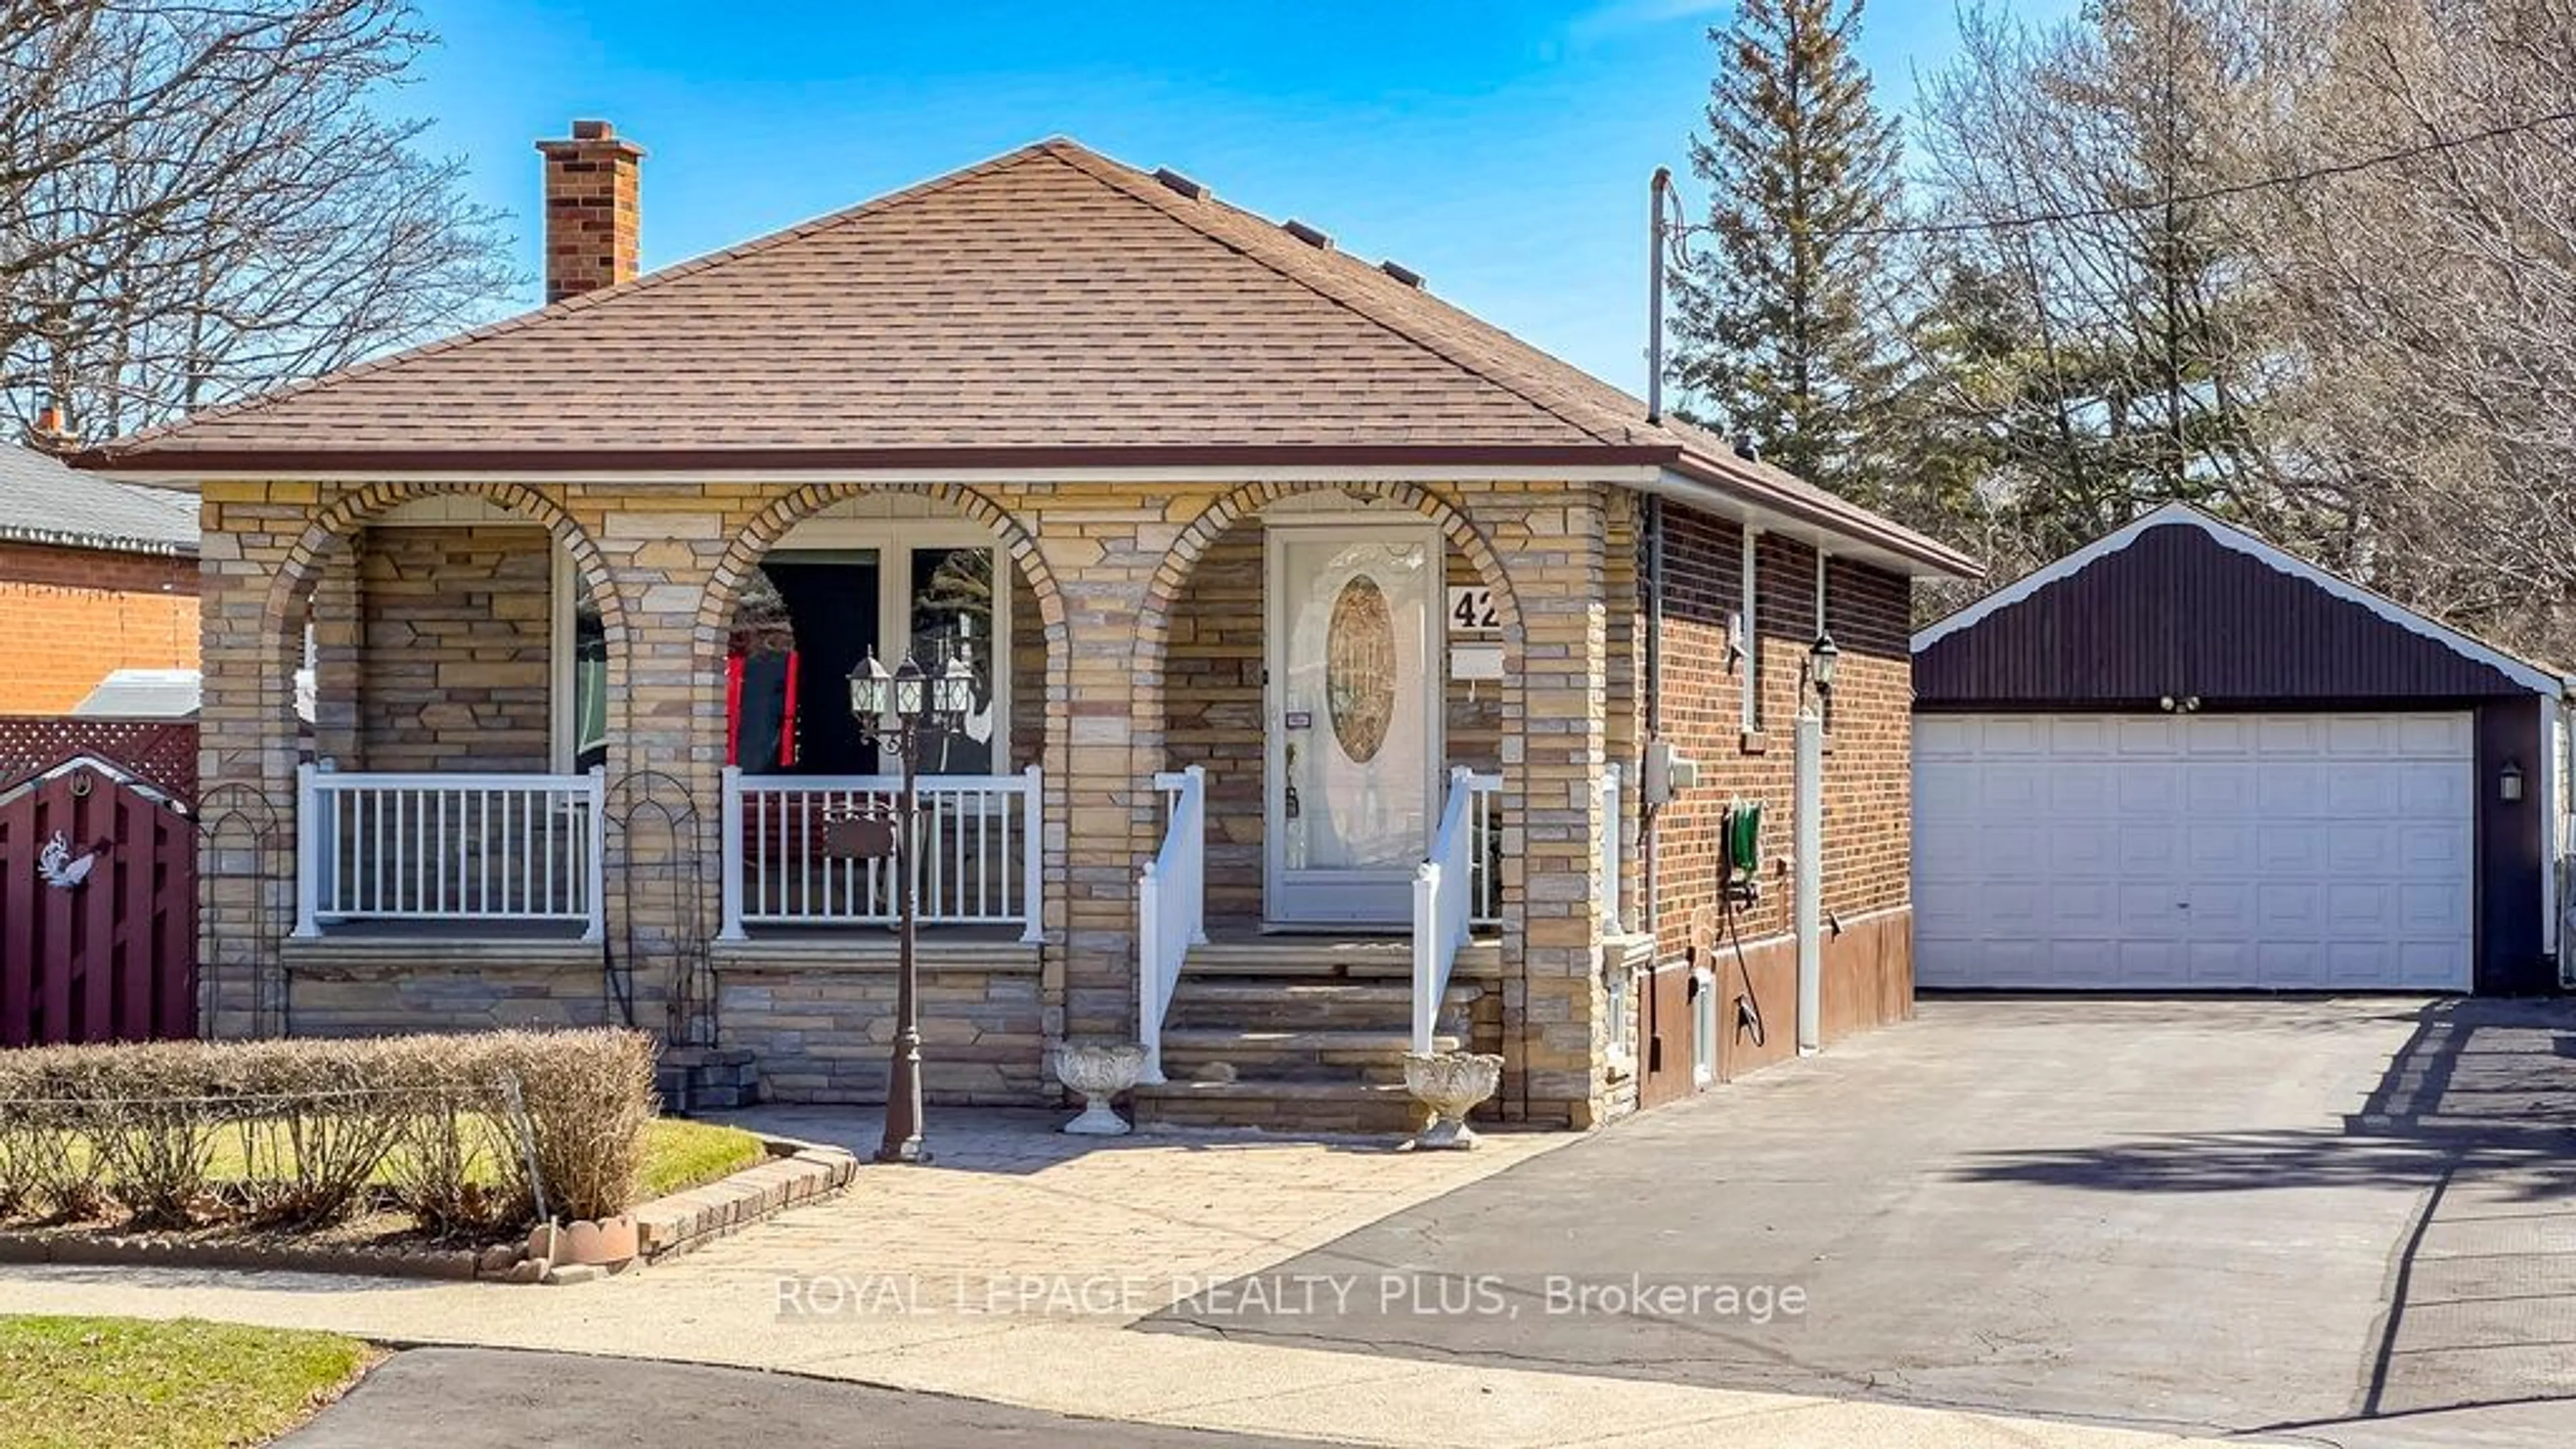 Home with brick exterior material for 429 Lanor Ave, Toronto Ontario M8W 2R9